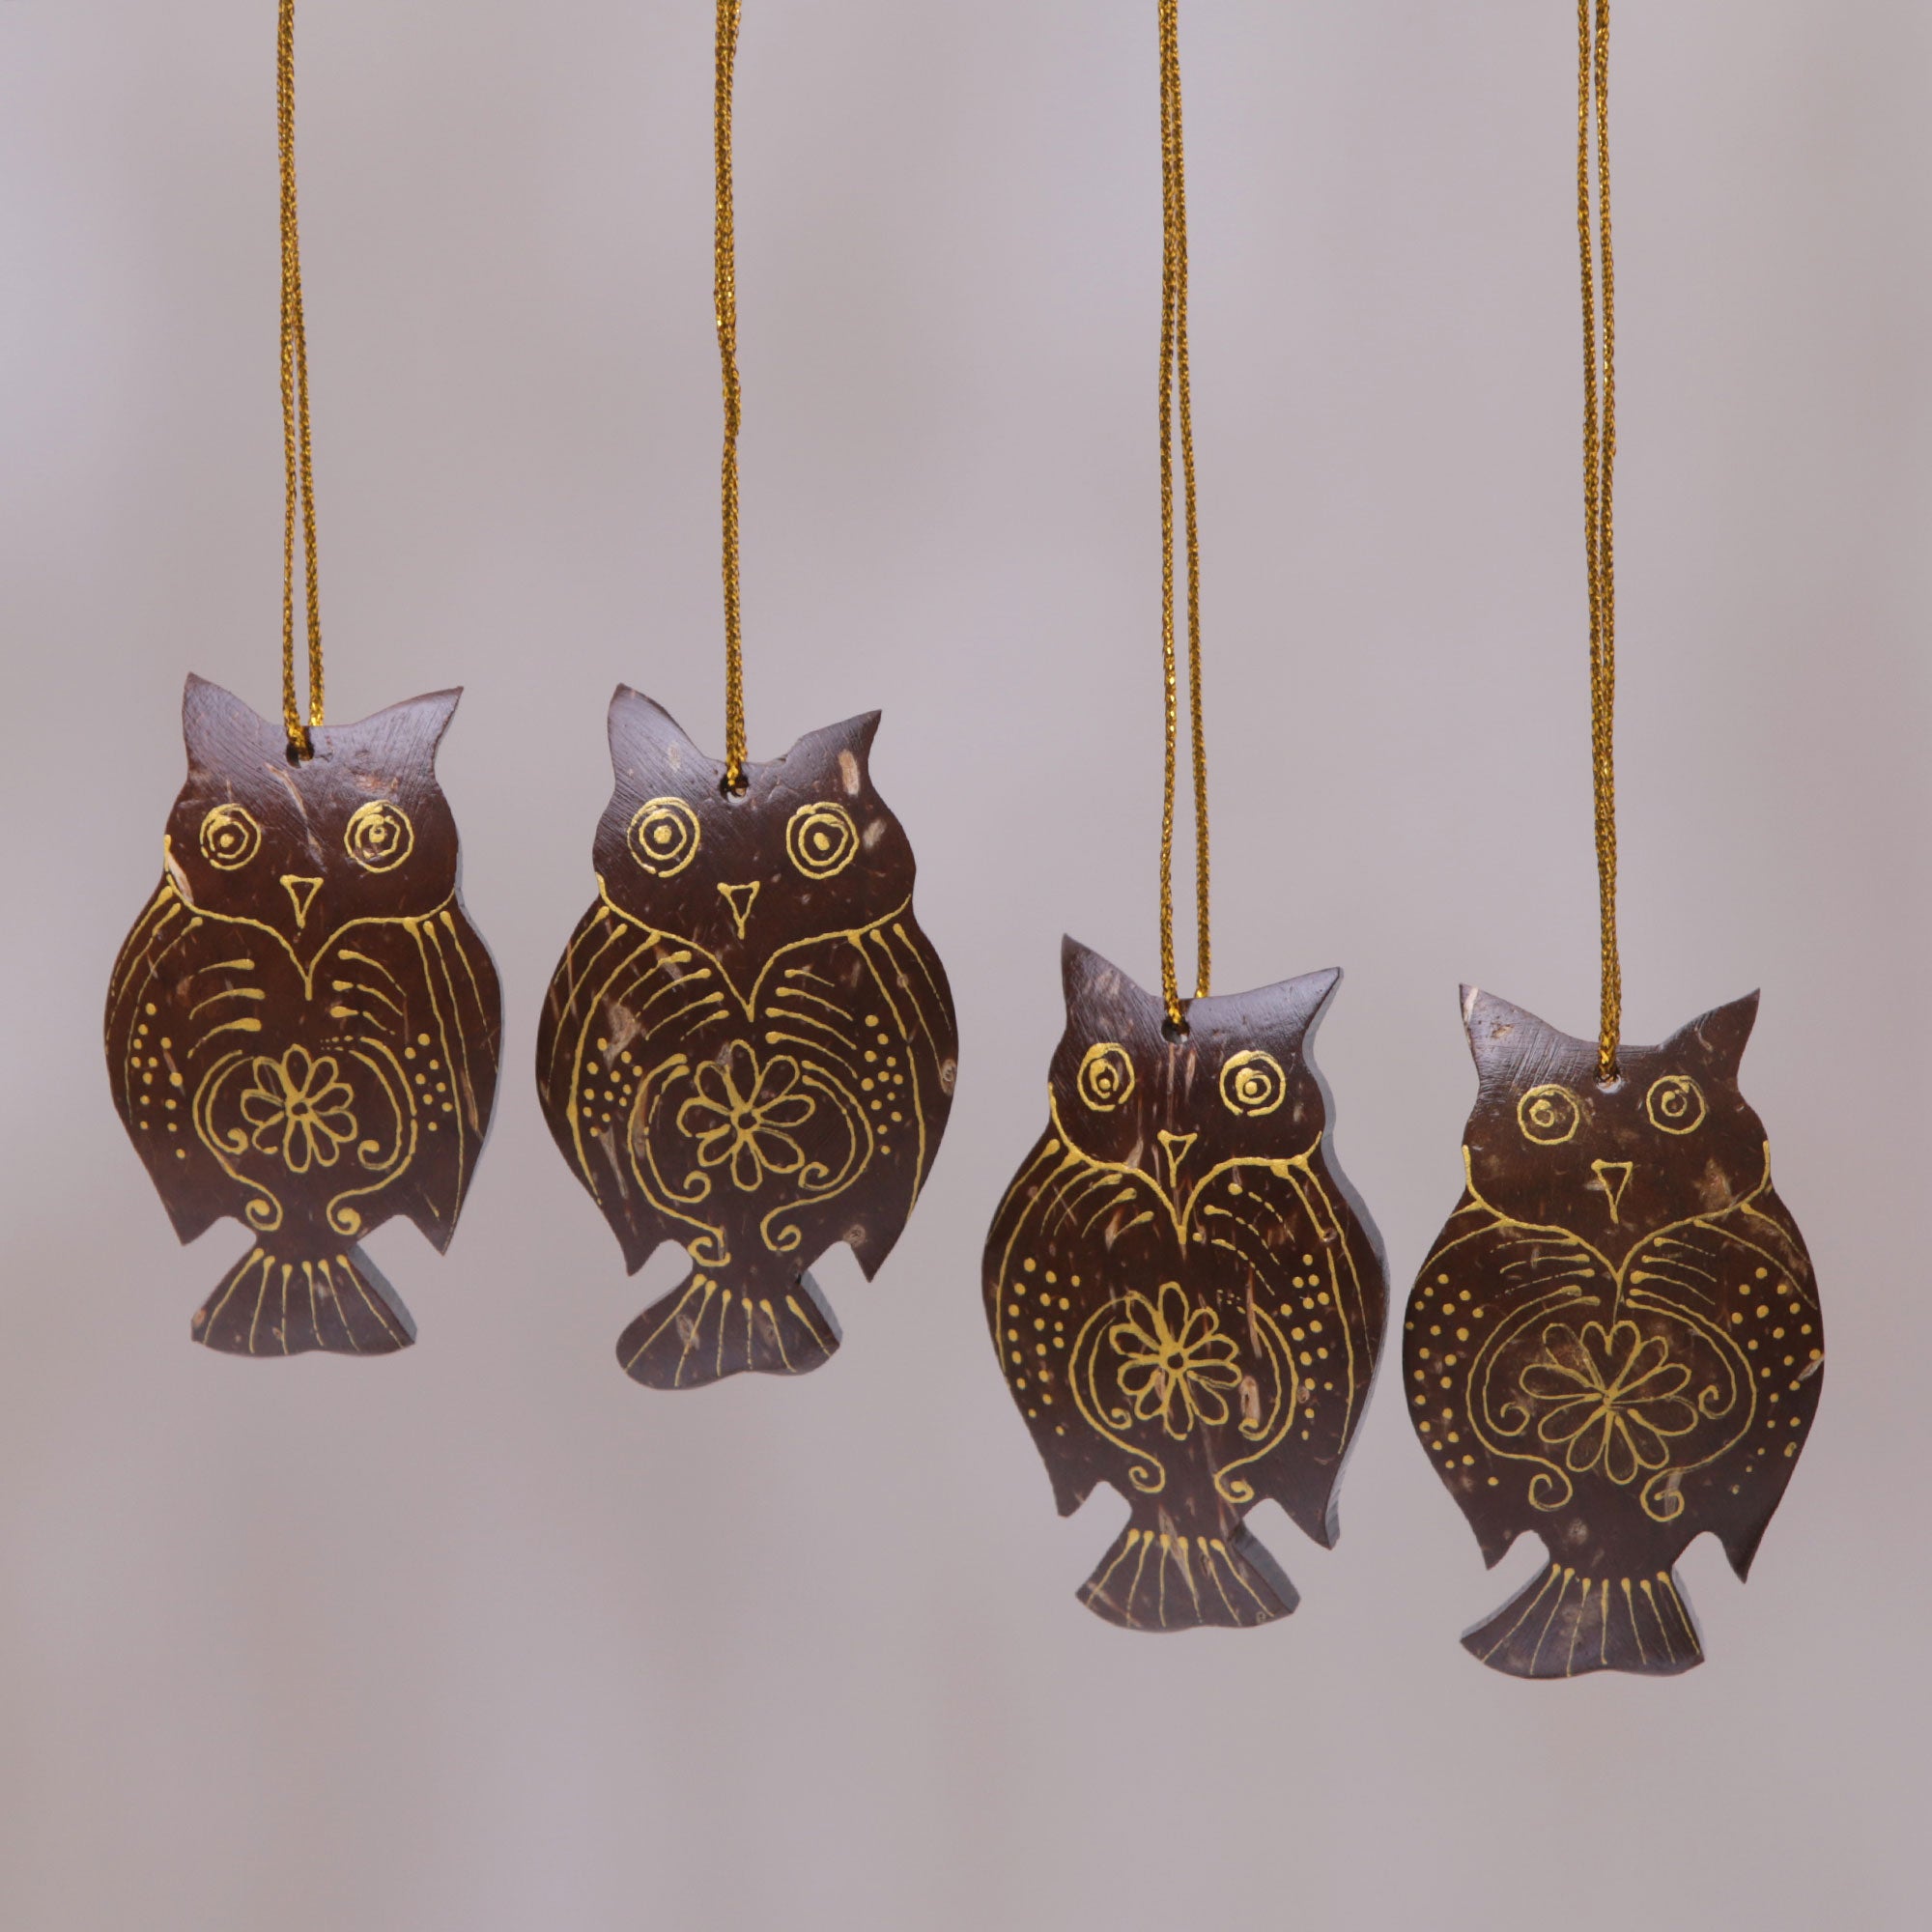 NOVICA Holiday Owl Coconut Shell Hanging Ornaments - Set Of 4